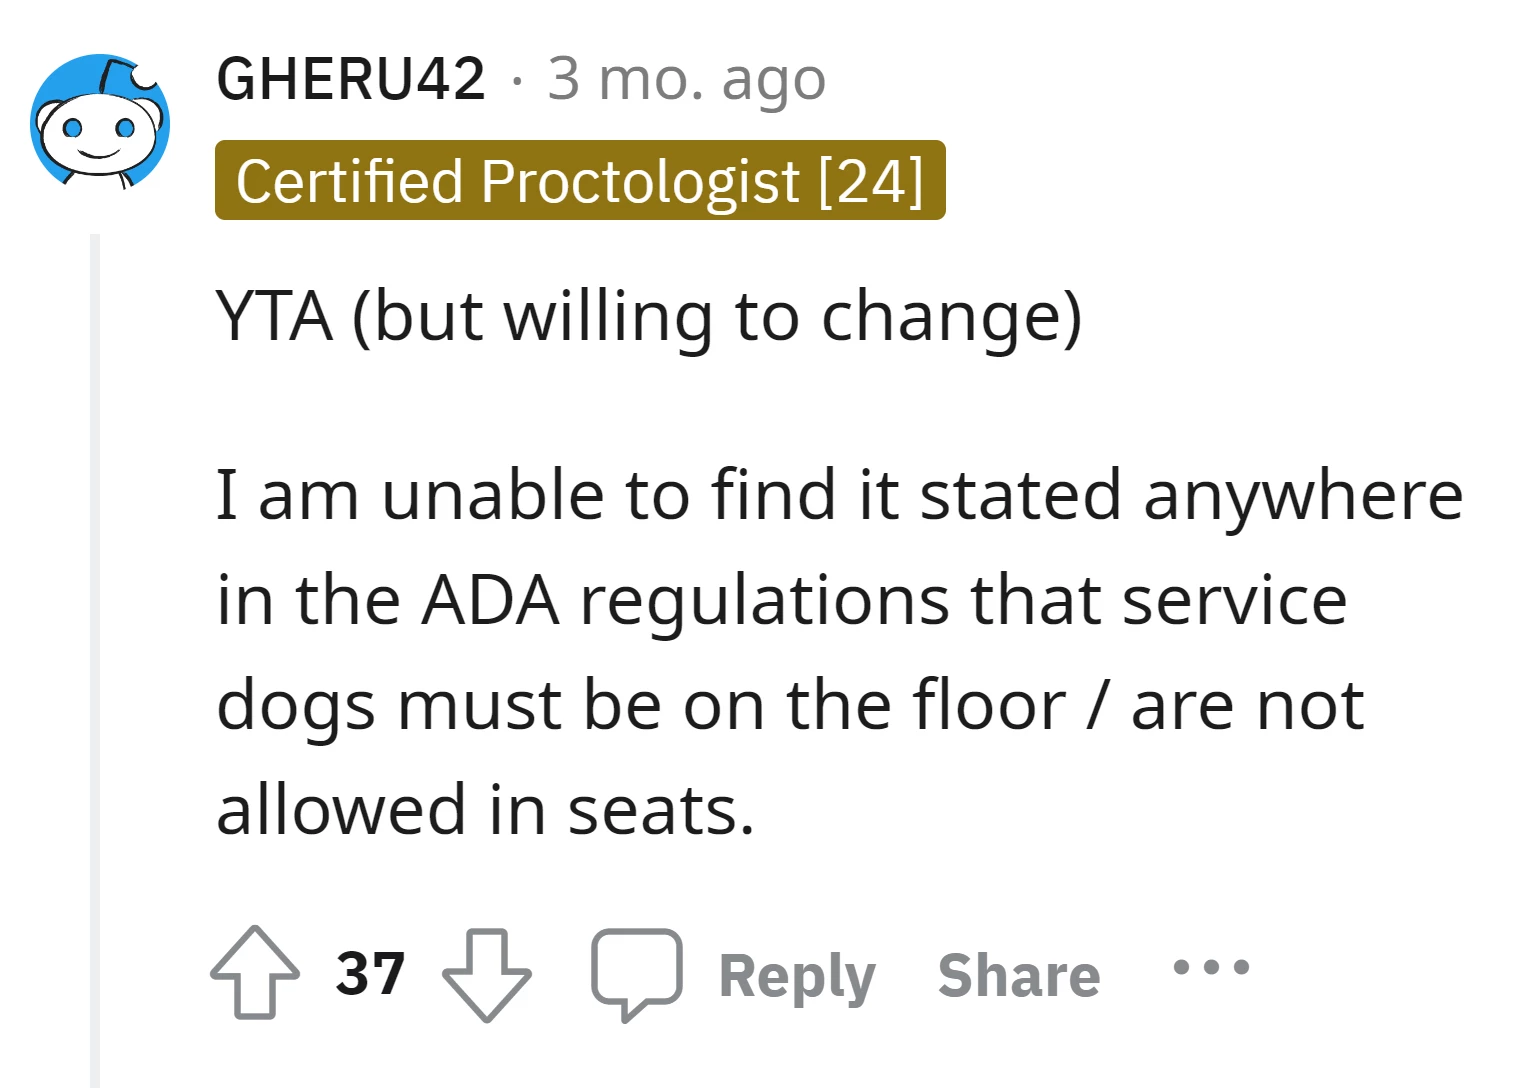 Commenter can't find any ADA regulations specifying that service dogs must be on the floor